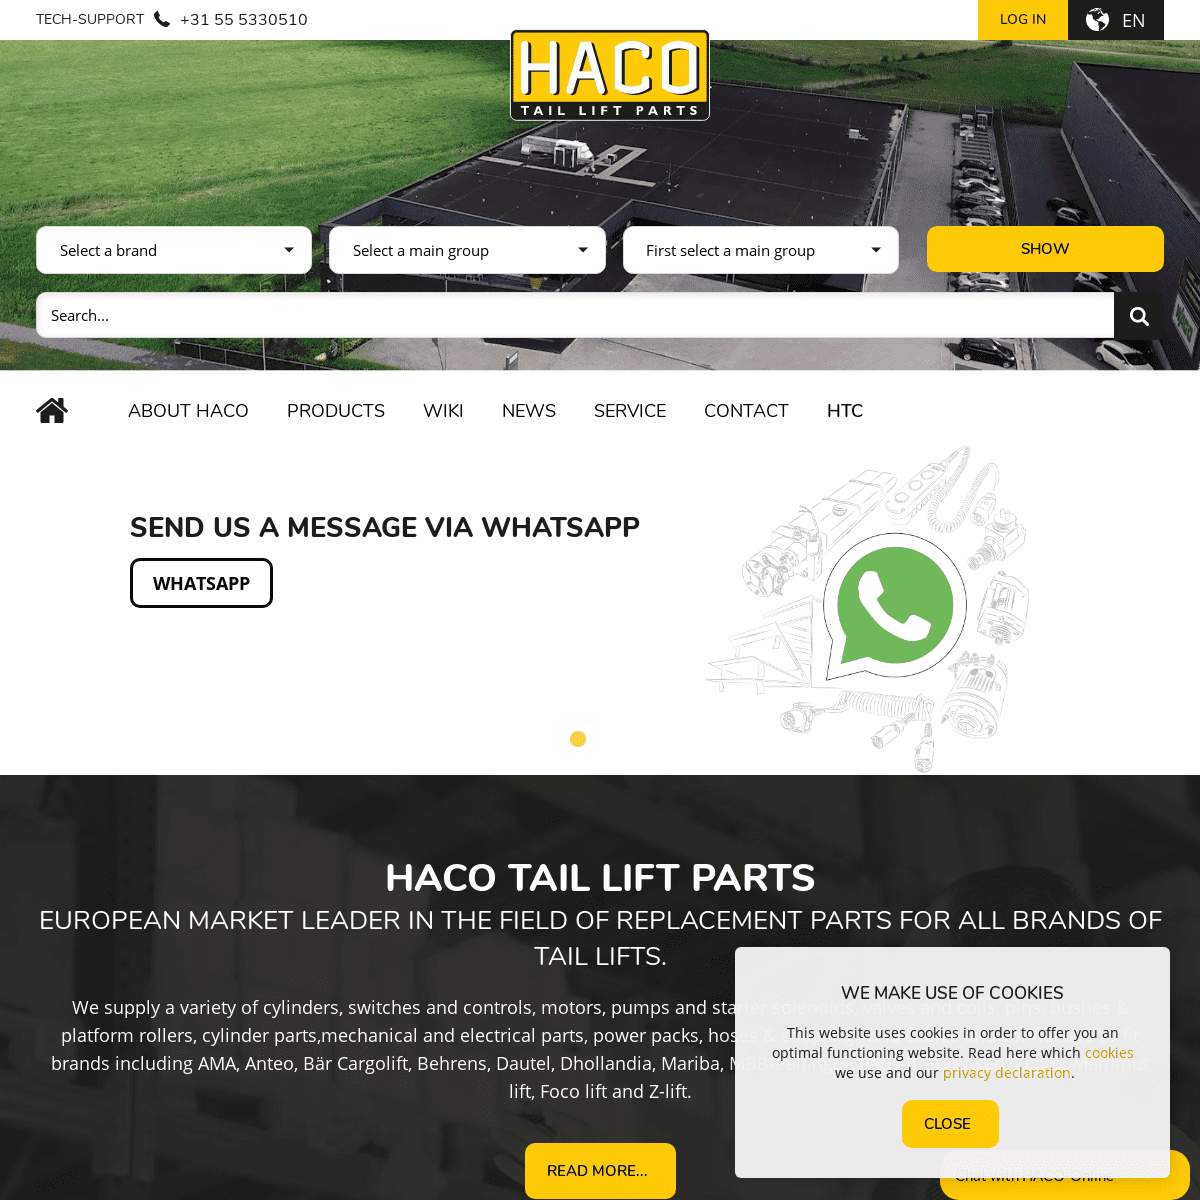 A complete backup of haco-parts.com